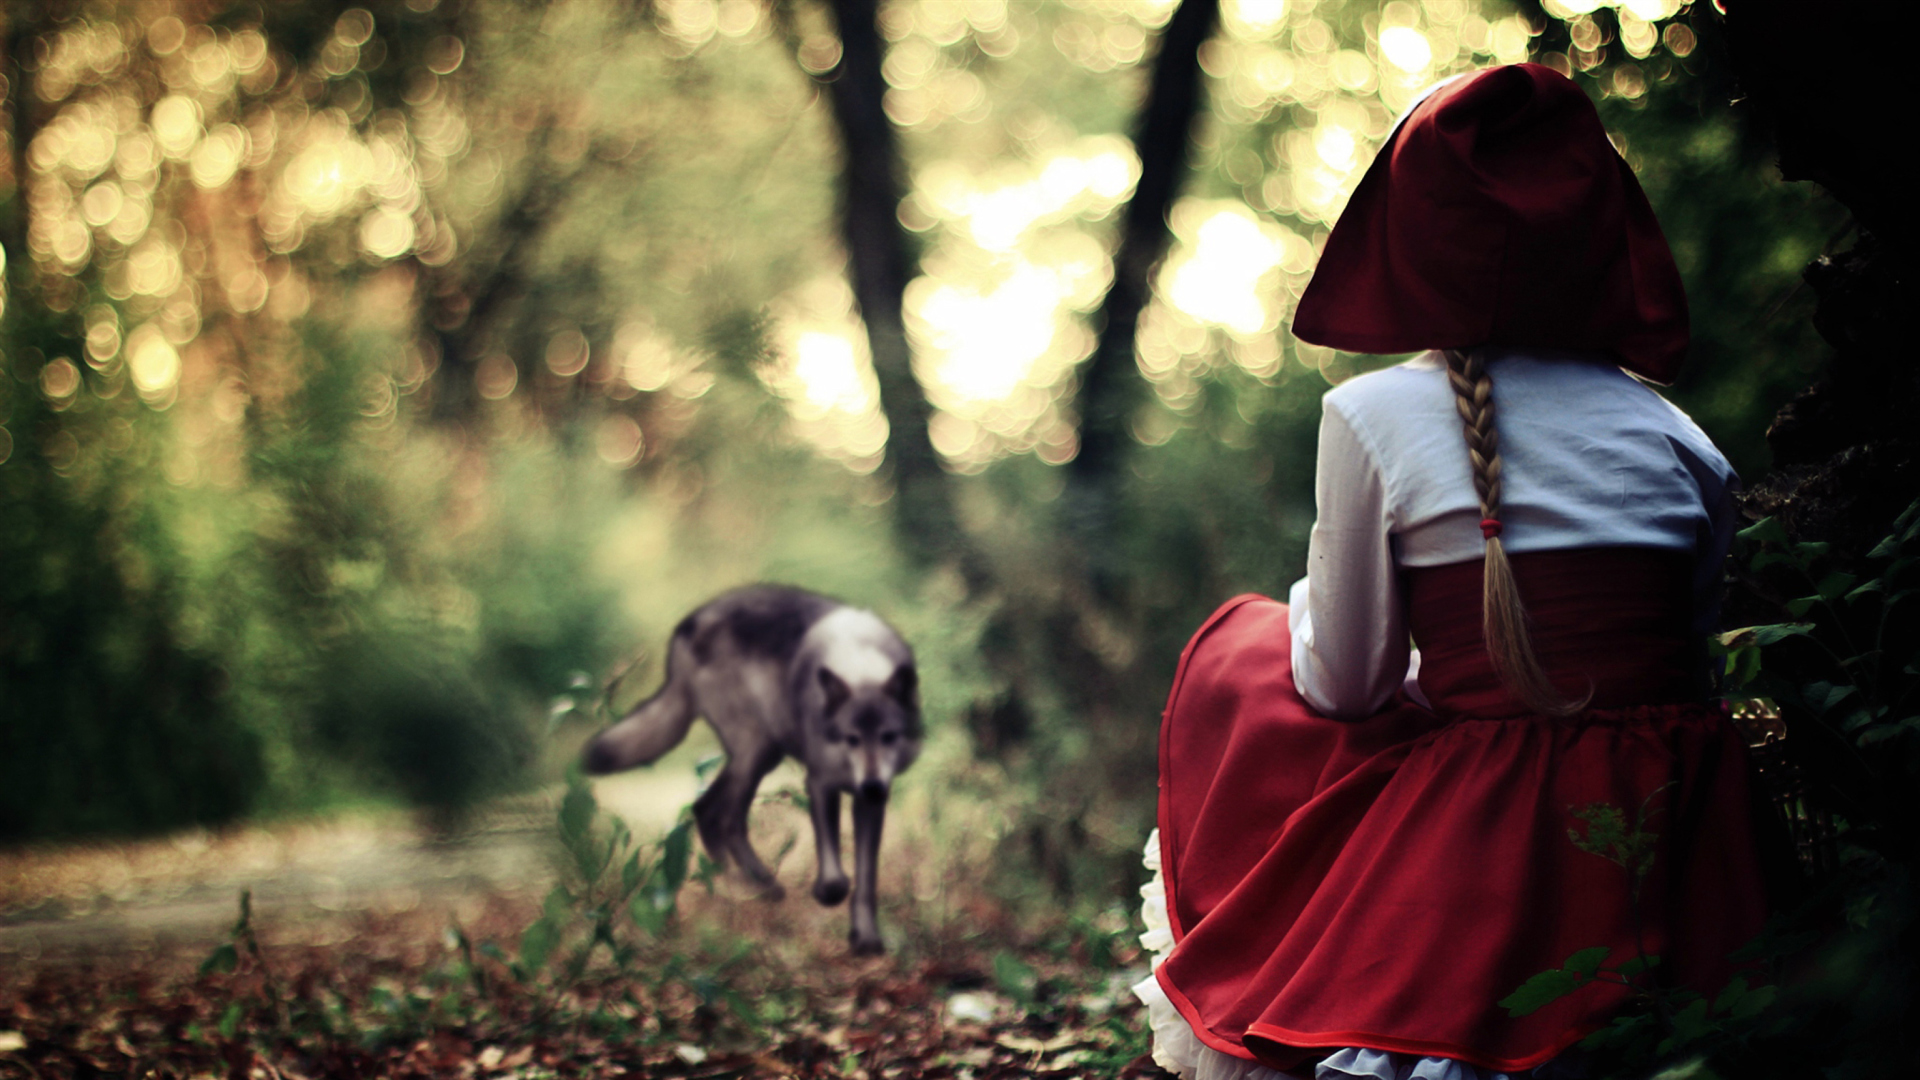 Red Riding Hood In Forest screenshot #1 1920x1080